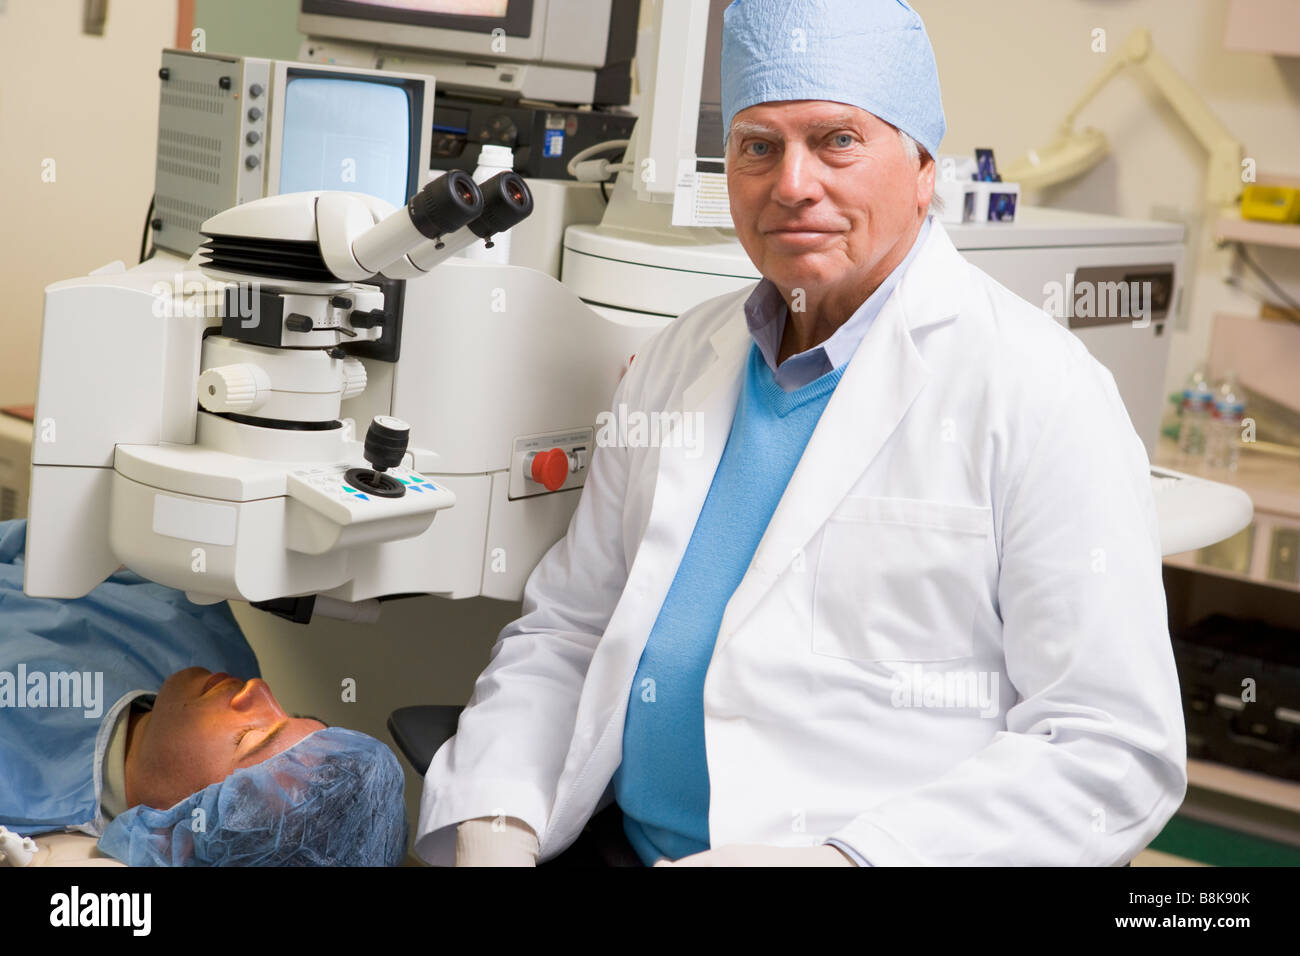 Doctor And Patient About To Undergo Eye Exam Stock Photo